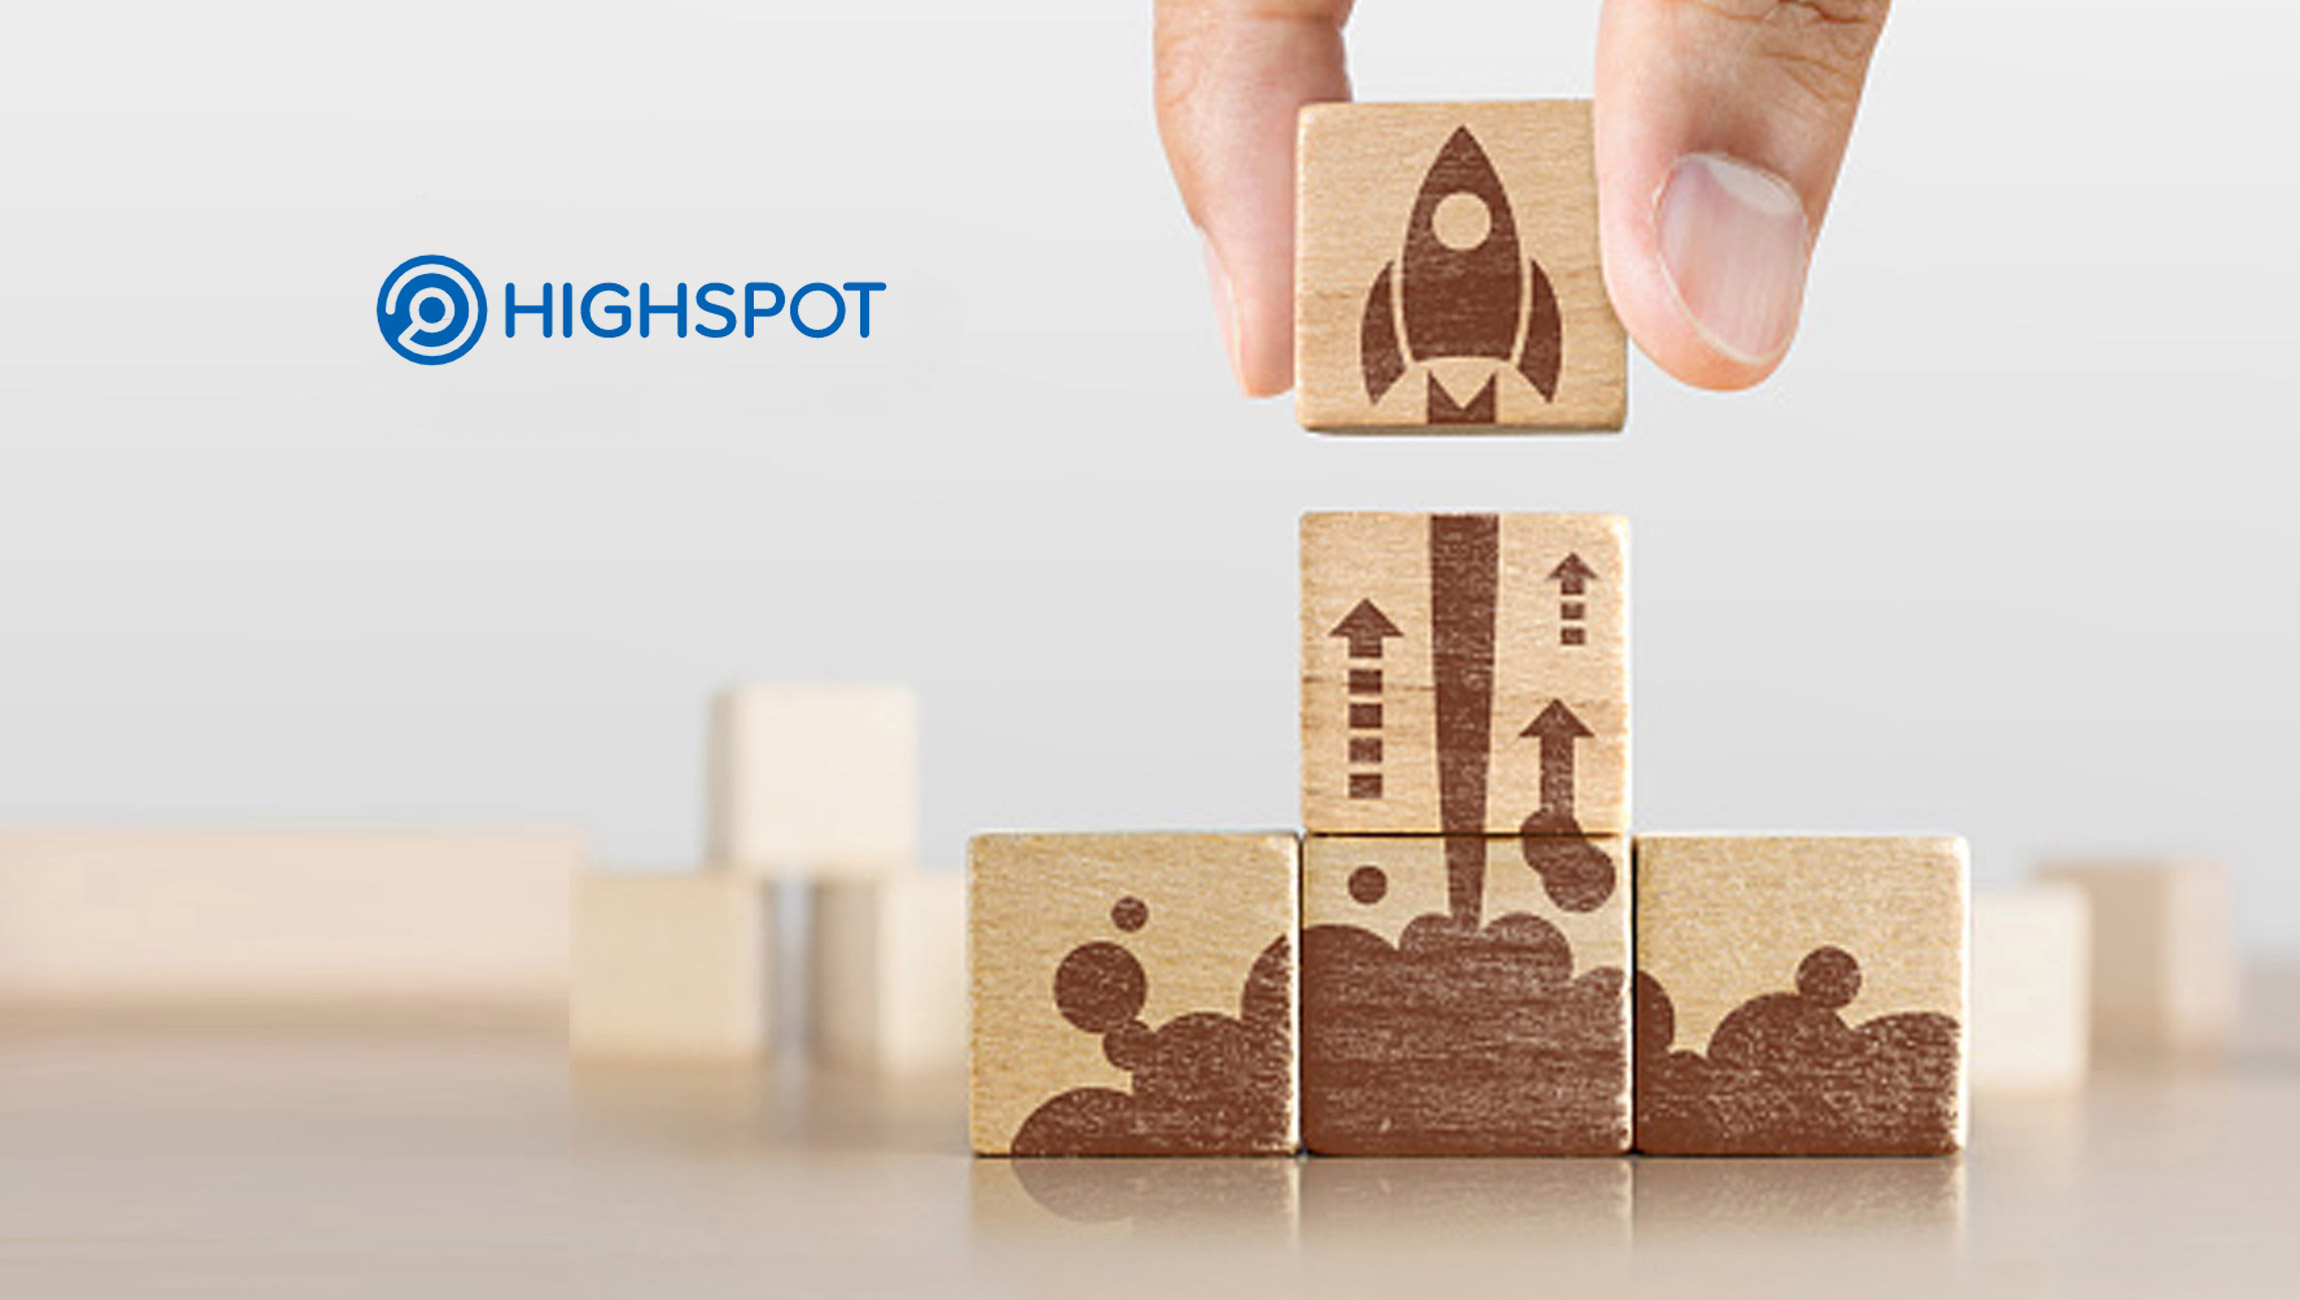 Highspot Launches Transformative Capabilities that Turn Strategy into Consistent Sales Performance